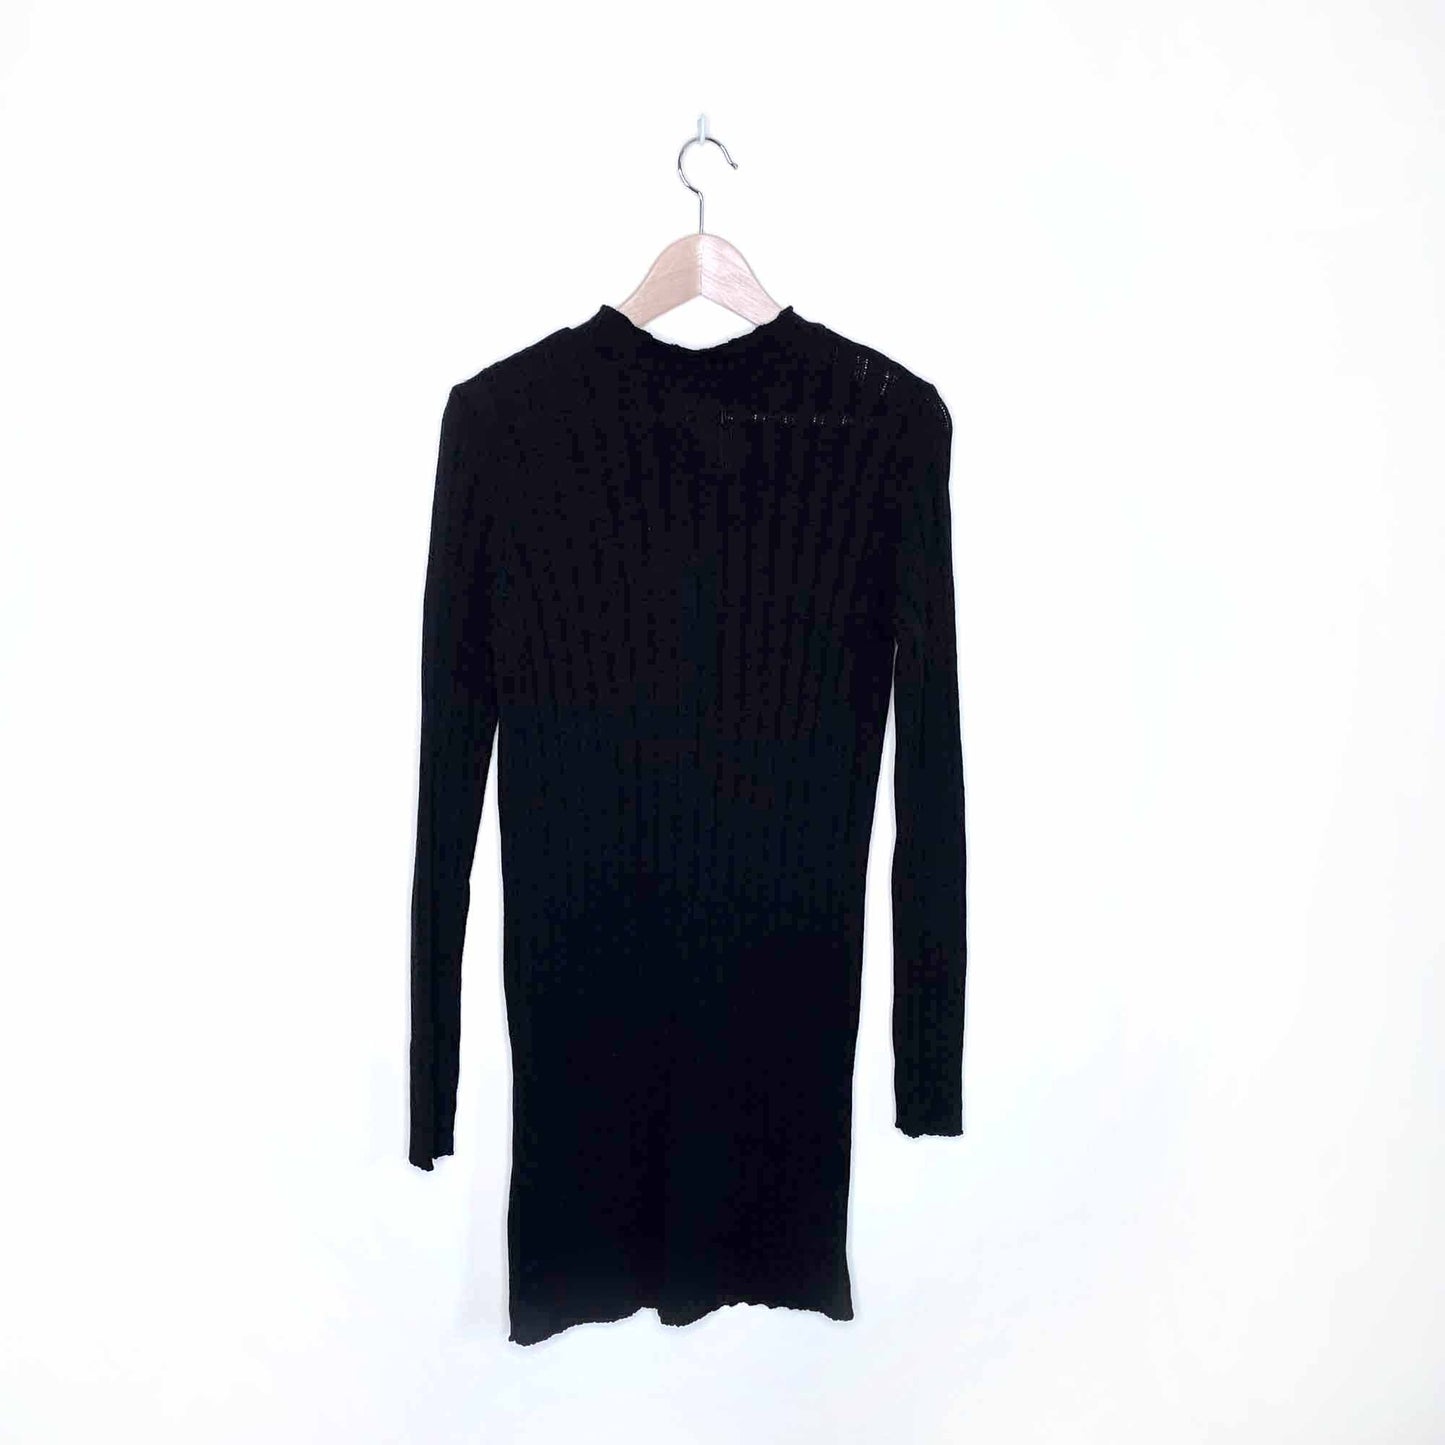 nwt pretty little thing ribbed sweater dress - size small